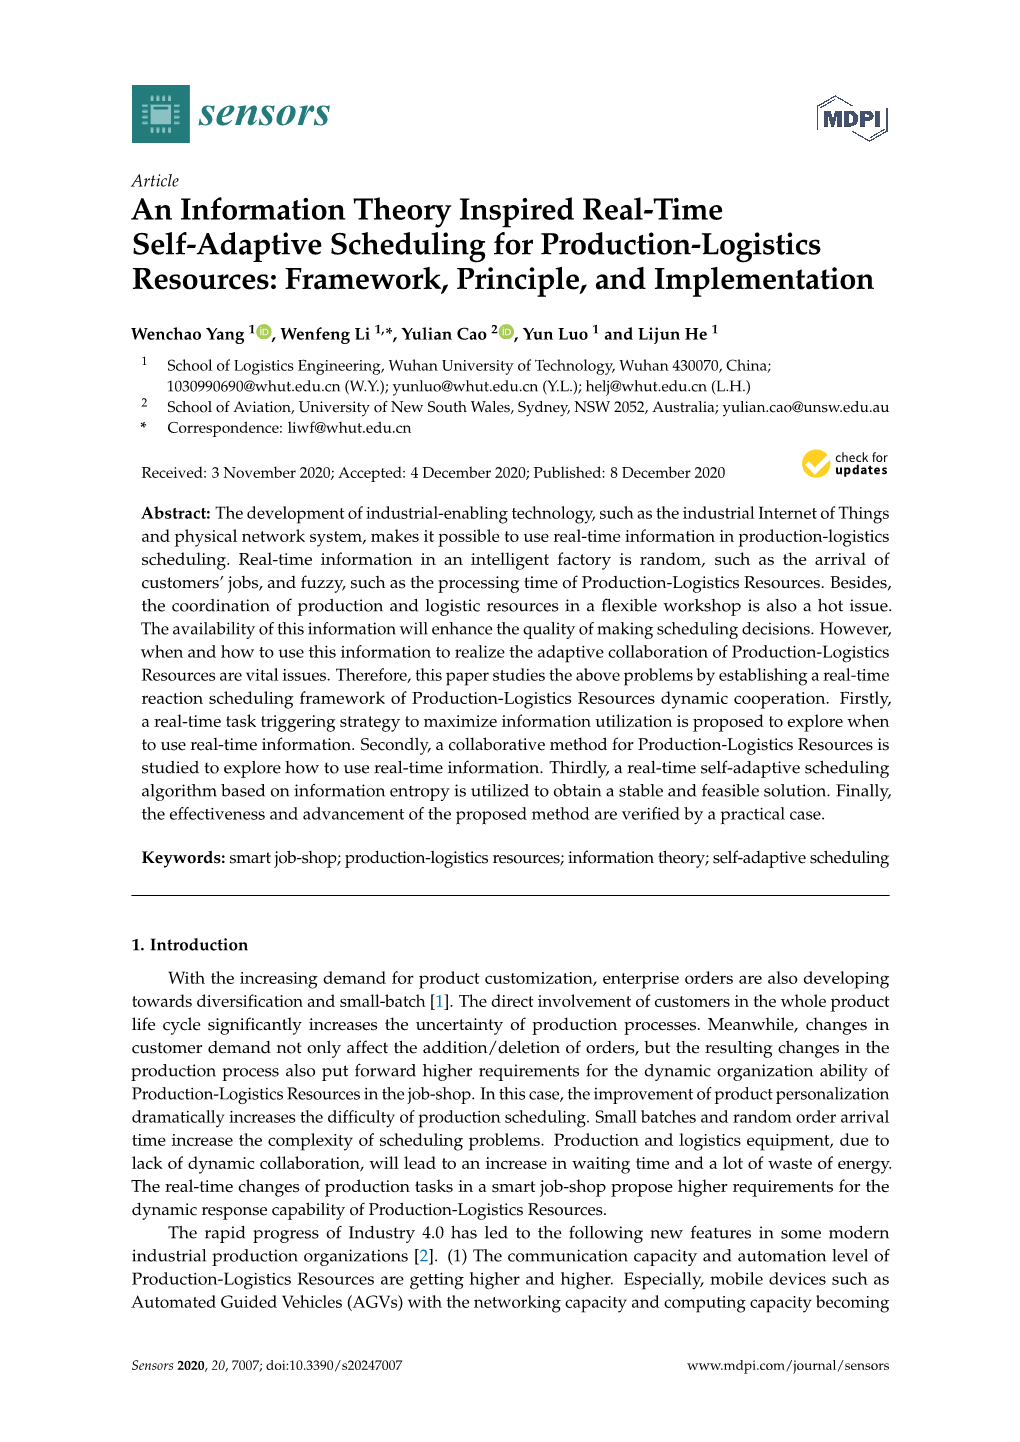 An Information Theory Inspired Real-Time Self-Adaptive Scheduling for Production-Logistics Resources: Framework, Principle, and Implementation